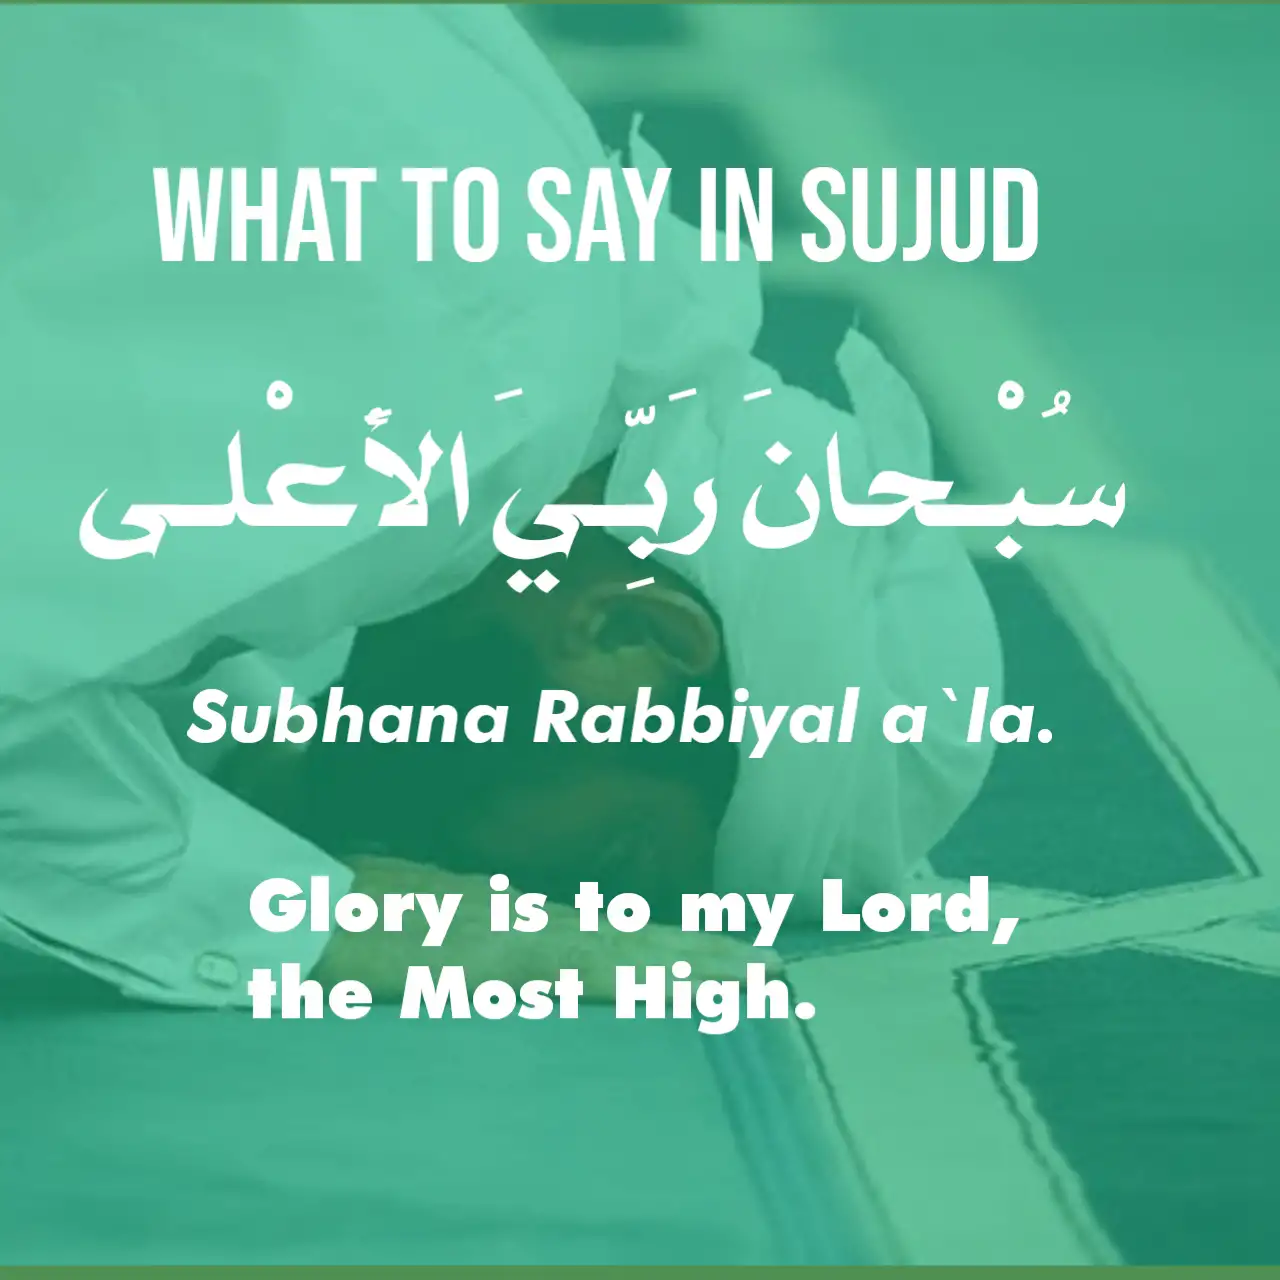 What to say in Sujood